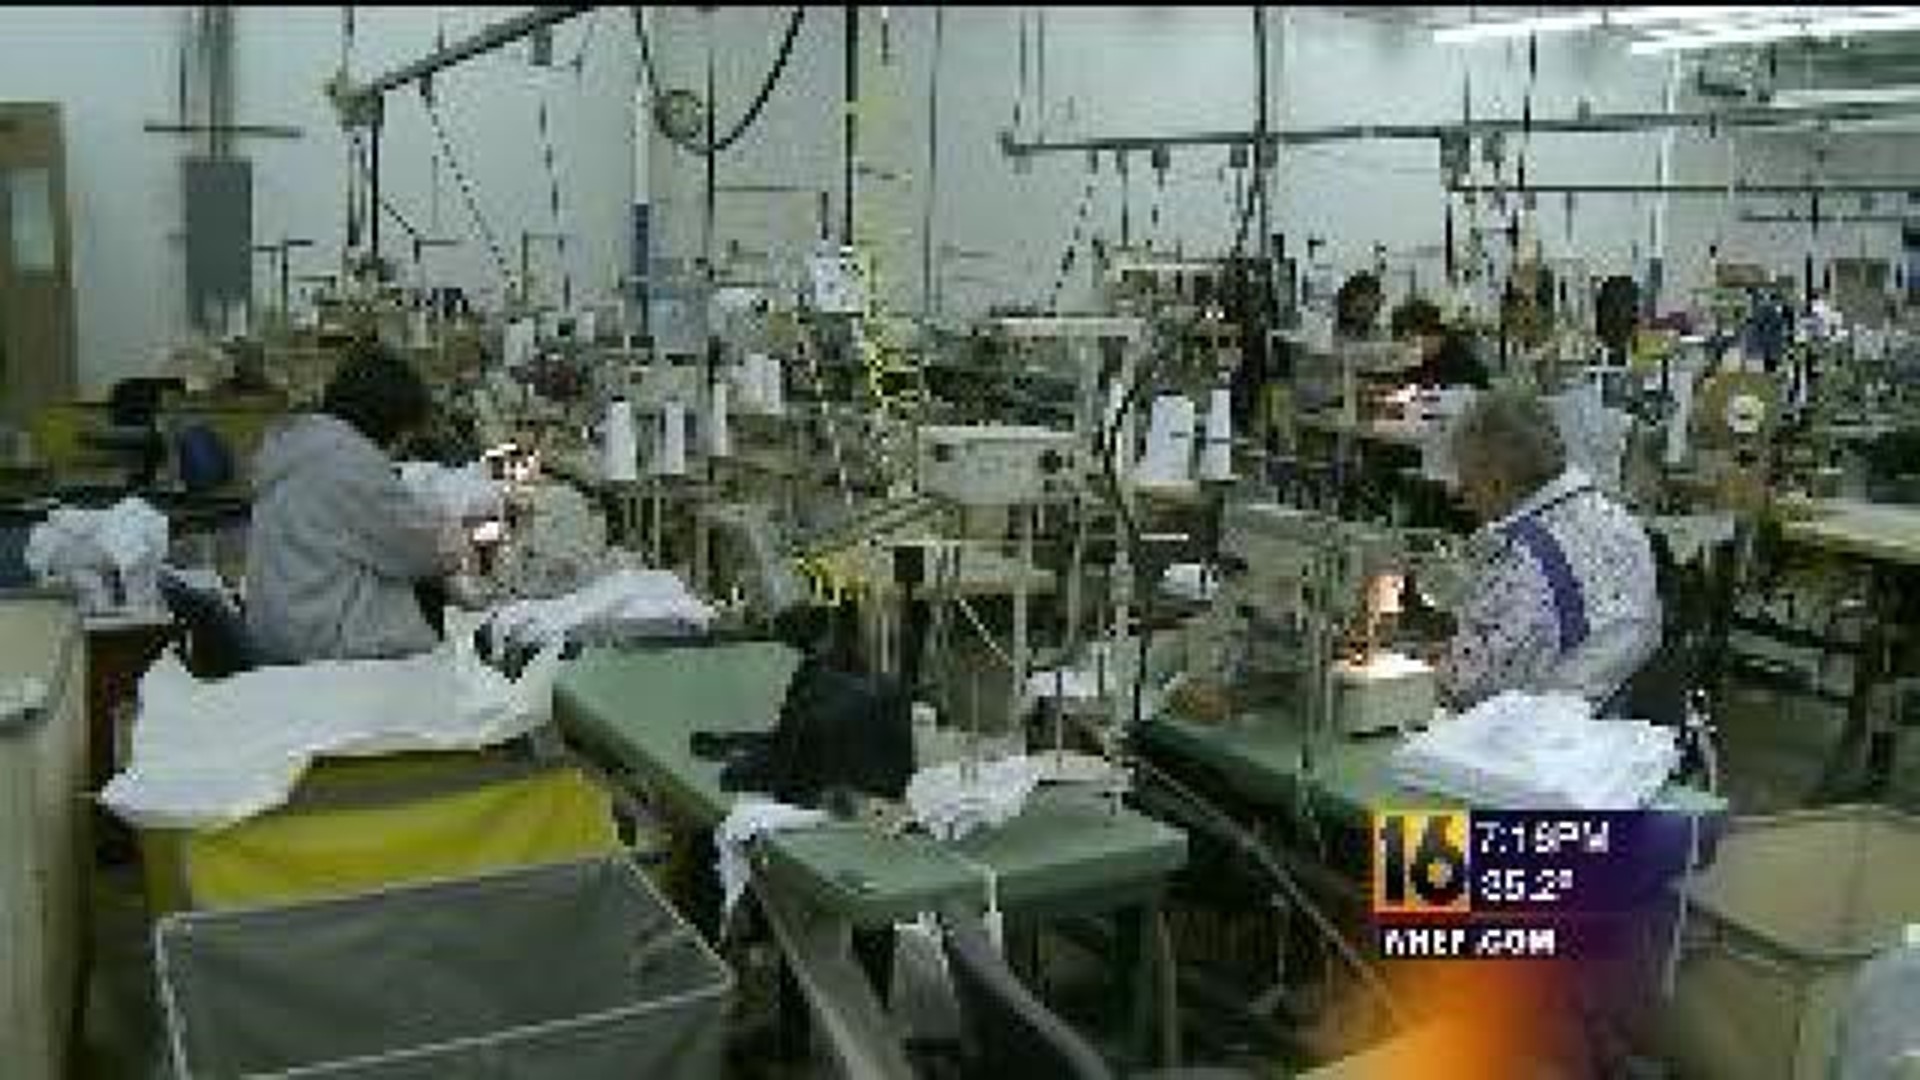 Schuylkill County Company To Close After 112 Years